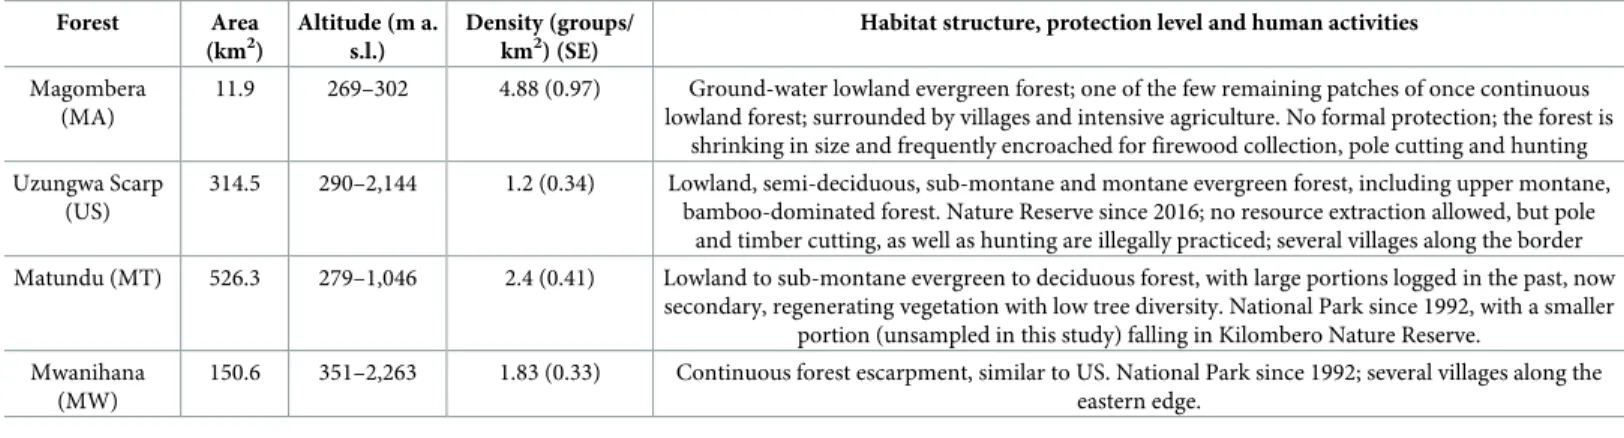 Table 1. Characteristics of the four study forests in the Udzungwa Mountains of Tanzania (MA, US, MT, MW) ordered by the degree of human impact and level of protection, from the most disturbed and least protected (MA) to the least disturbed and most protec